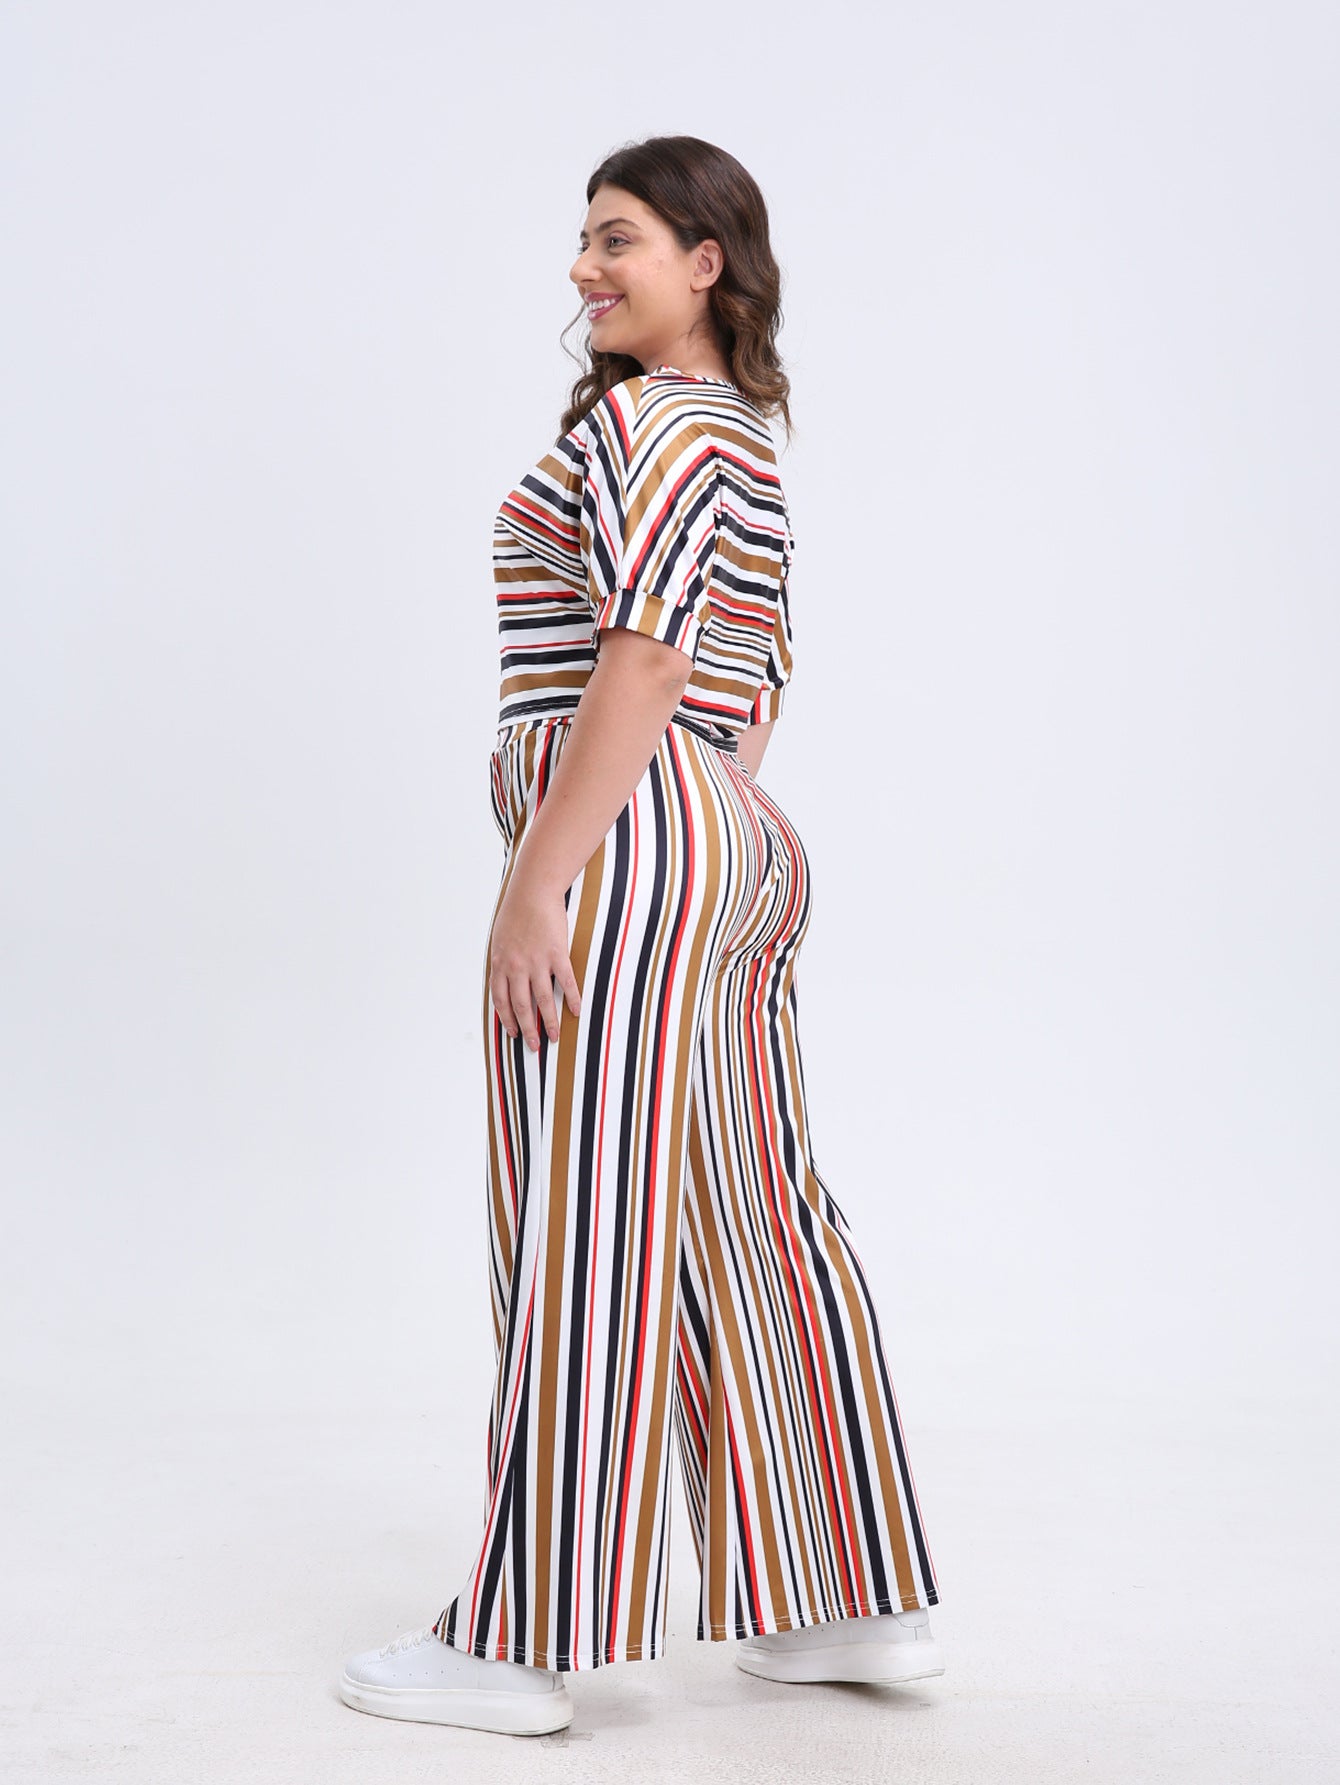 BamBam Plus Size Women Casual Short Sleeve Top And Striped Wide Leg Pants Two-piece Set - BamBam